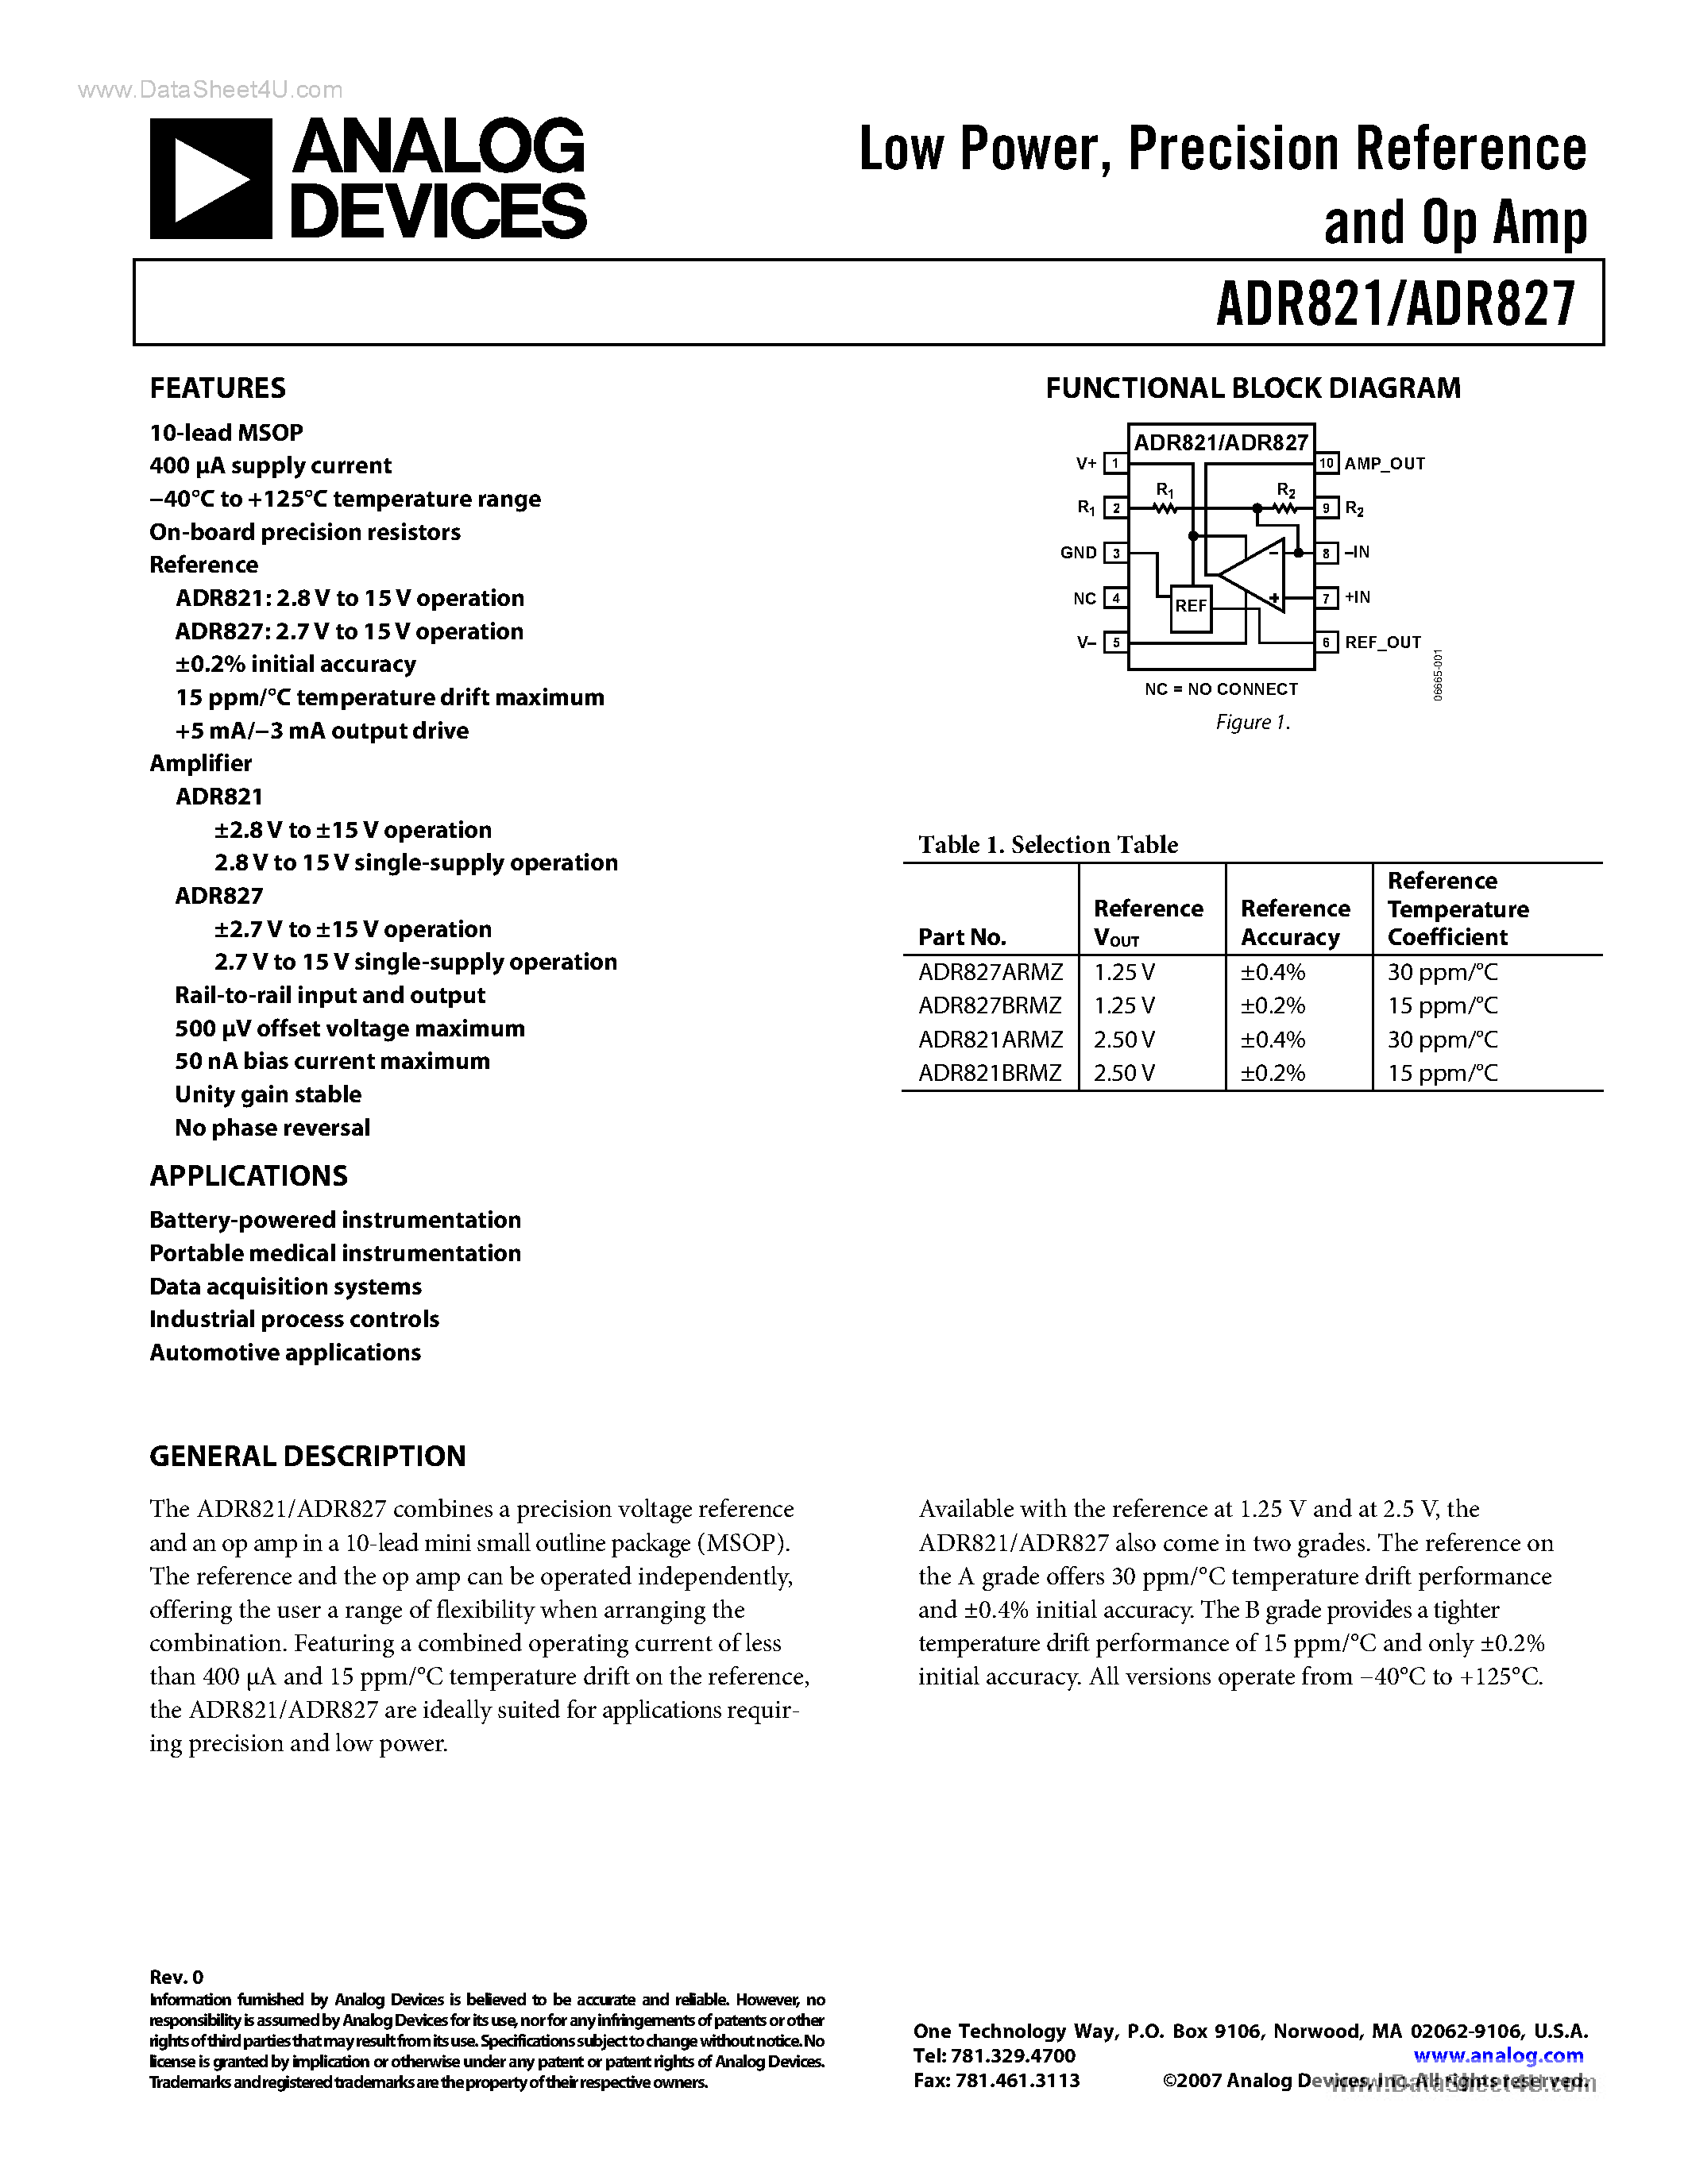 Даташит ADR821 - (ADR821 / ADR827) precision voltage reference and op amp страница 1